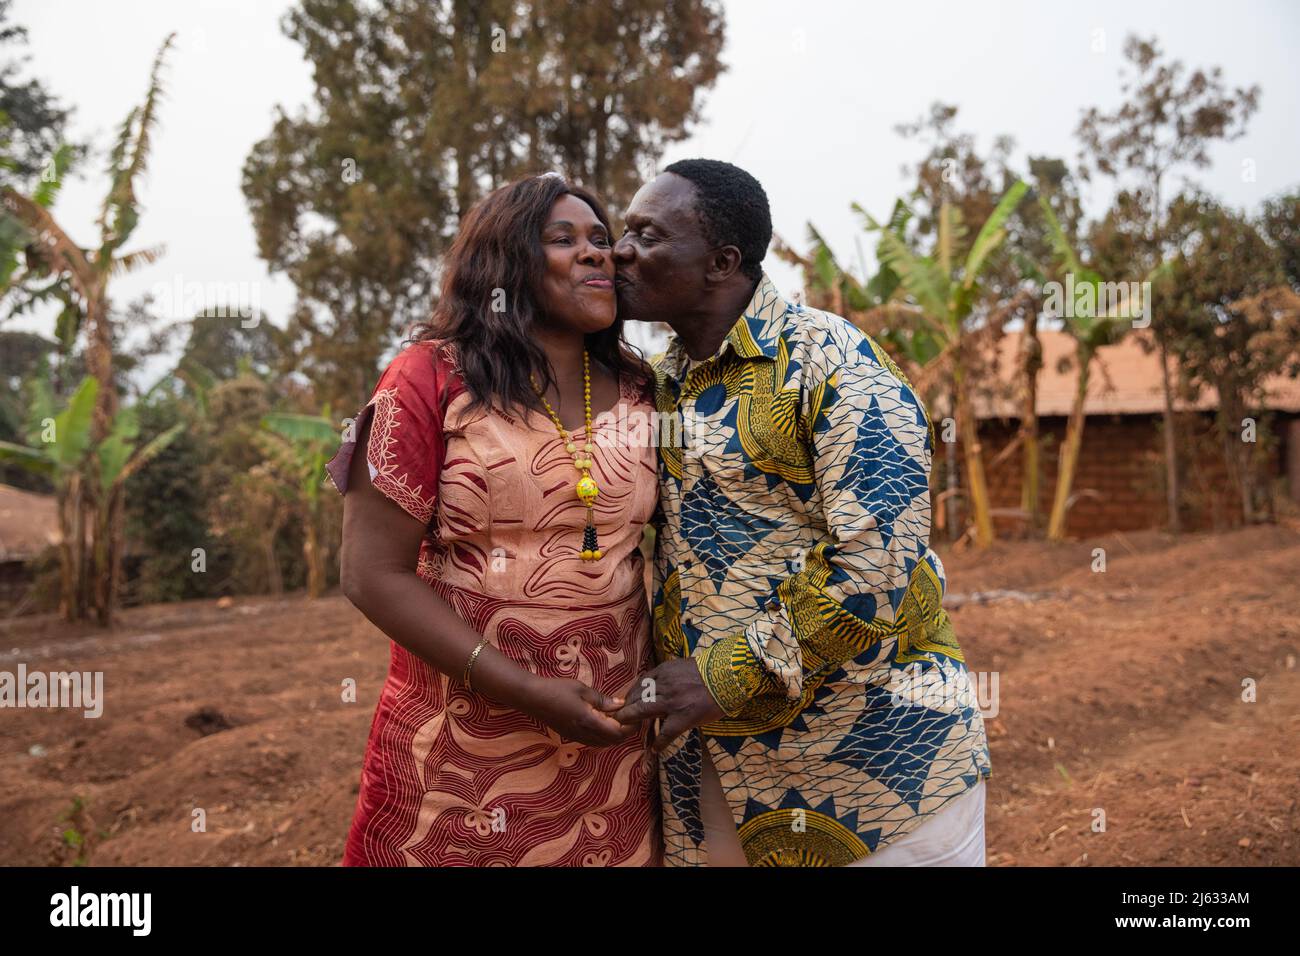 a senior African couple kissing, romantic and passionate moment between partners Stock Photo